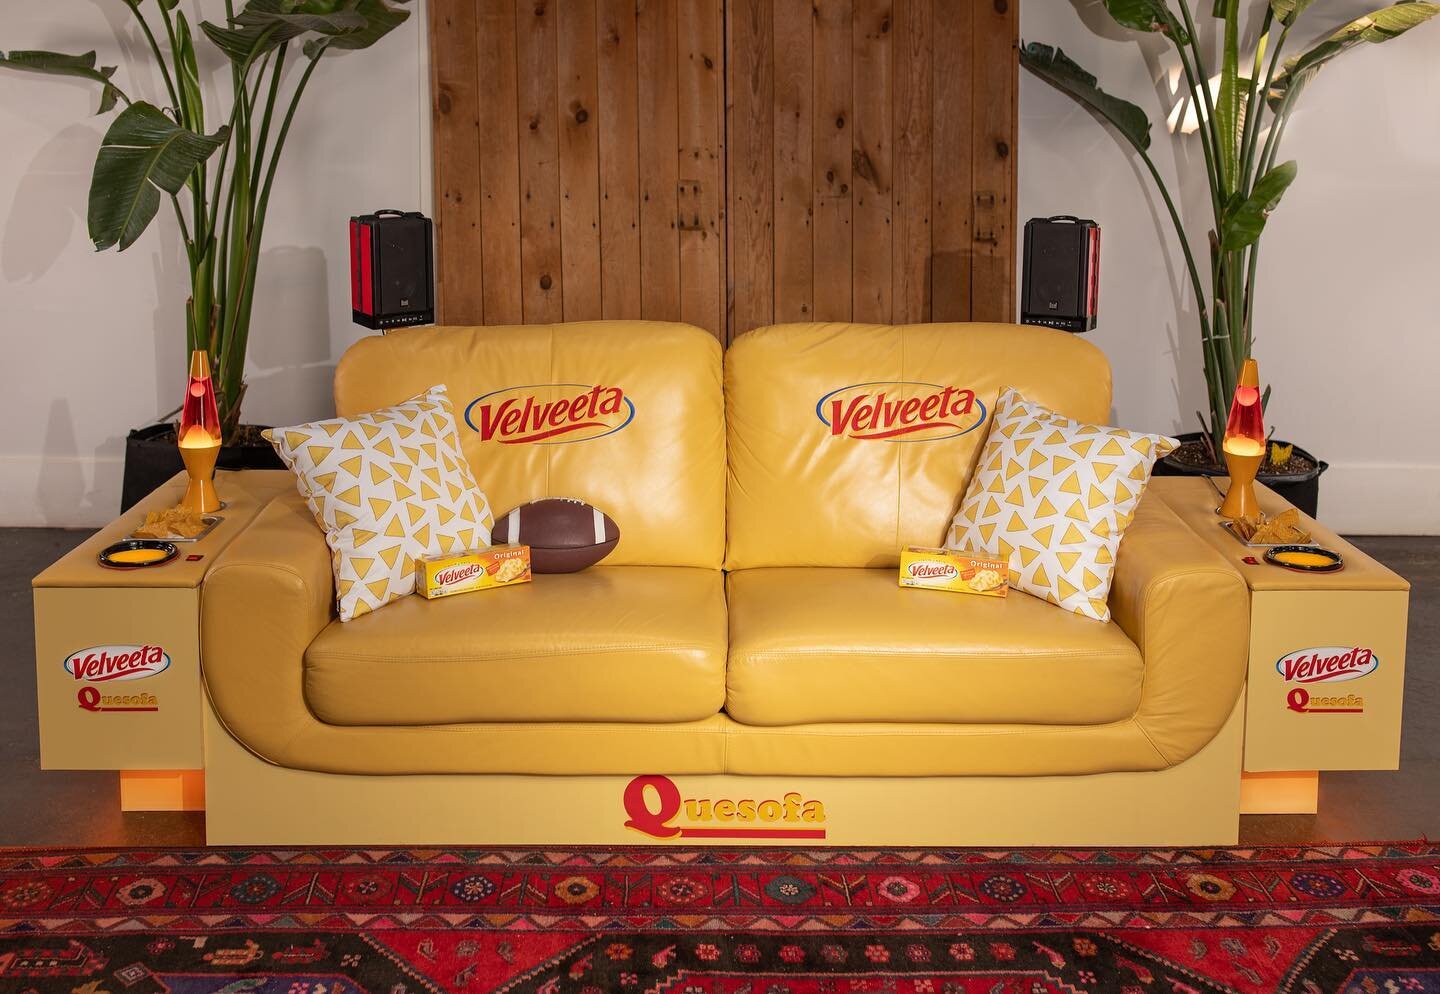 It&rsquo;s Super Bowl weekend &amp; we all wish we were watching within the comfort of the Quesofa. Whipping up some cheese dip &amp; reminiscing on this velvet gold @velveeta couch buildout will have to do.